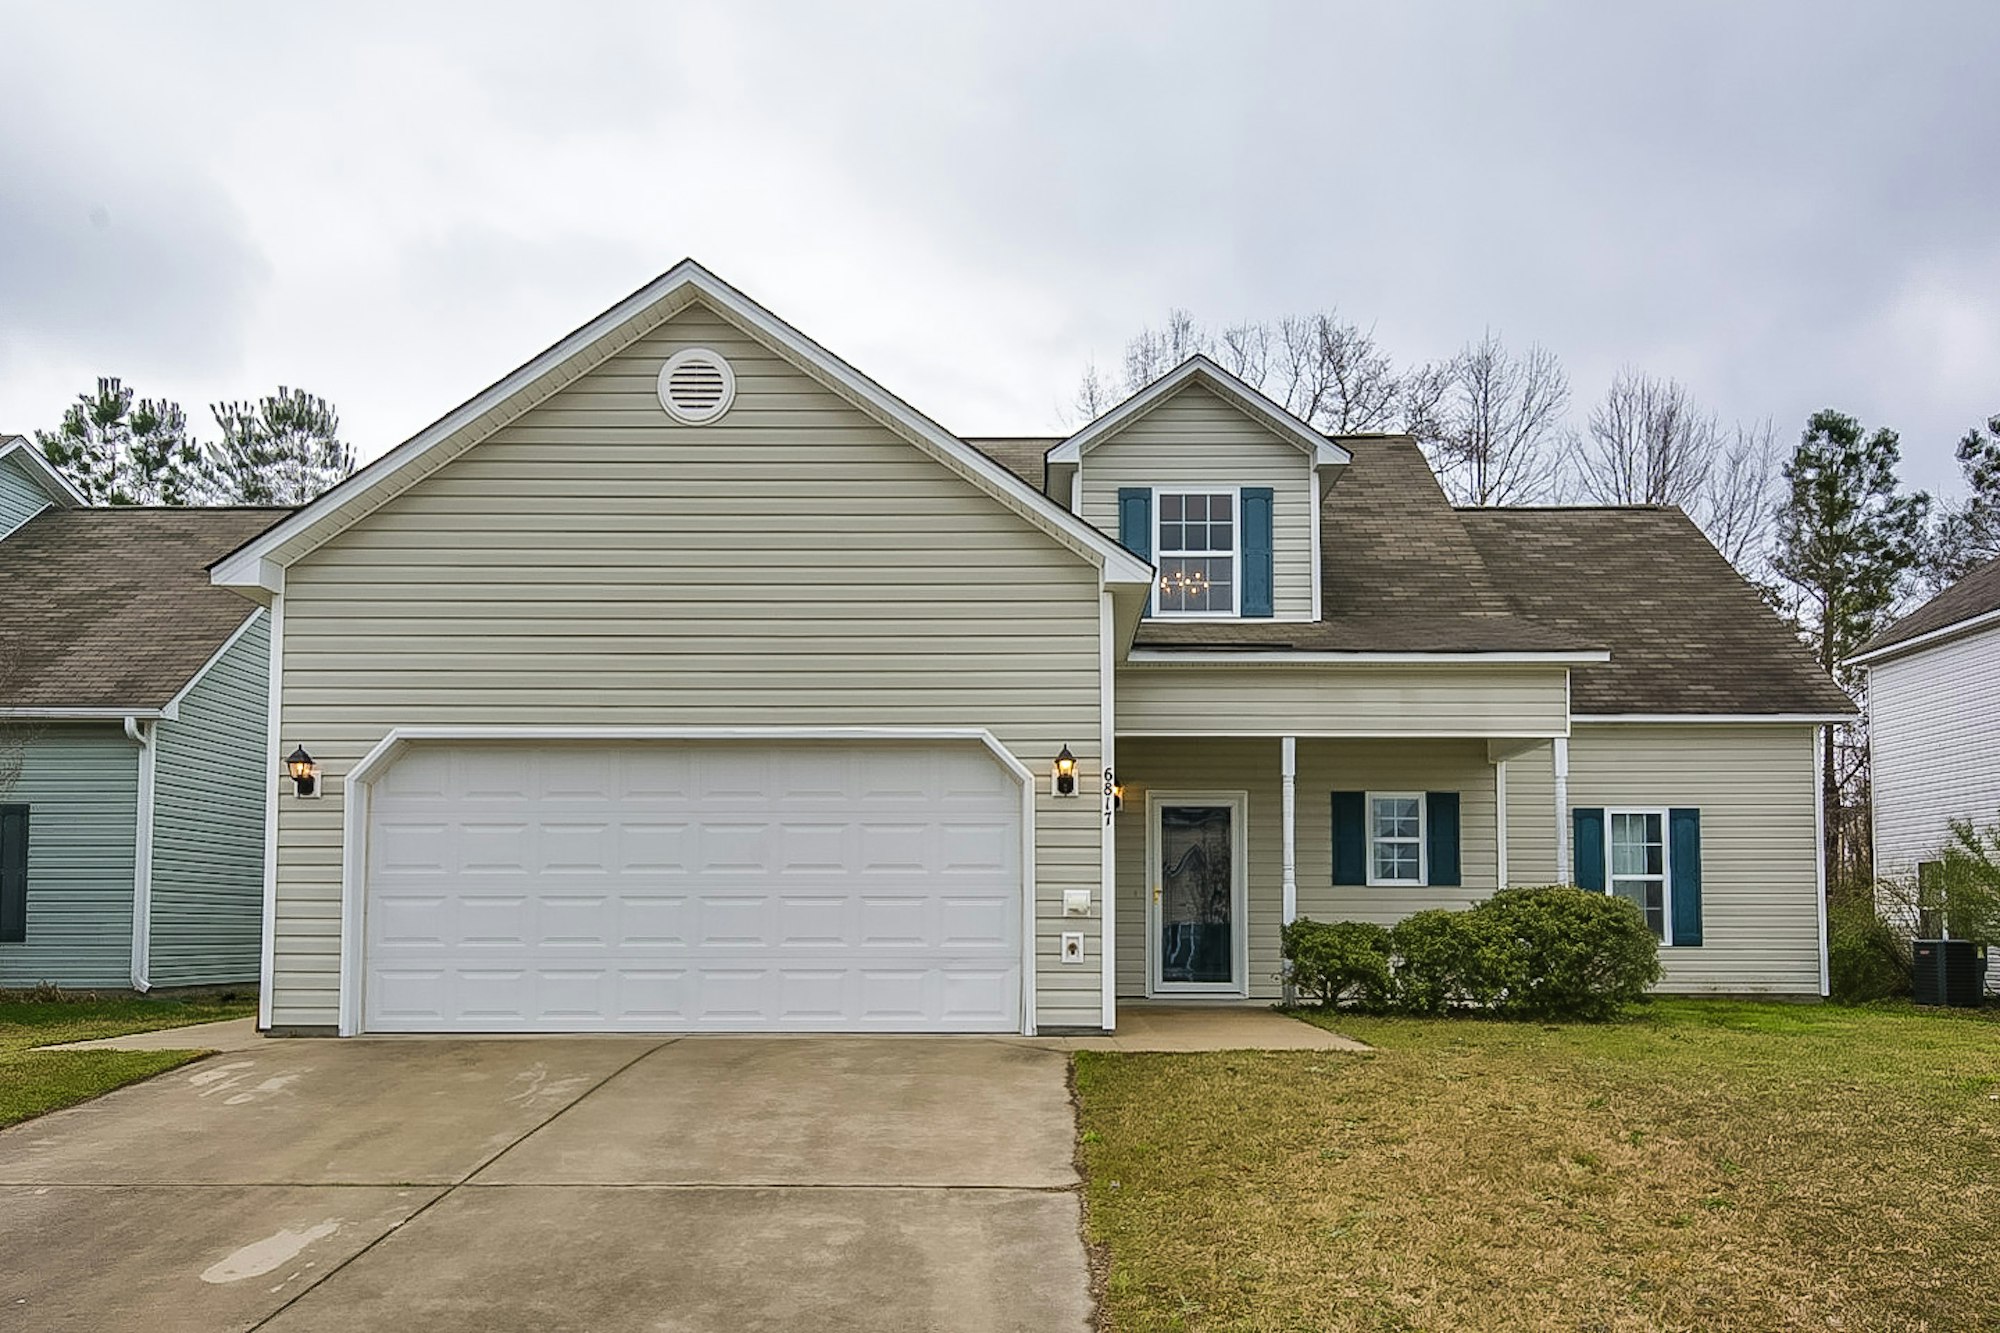 Photo 1 of 19 - 6817 Paint Rock Ln, Raleigh, NC 27610